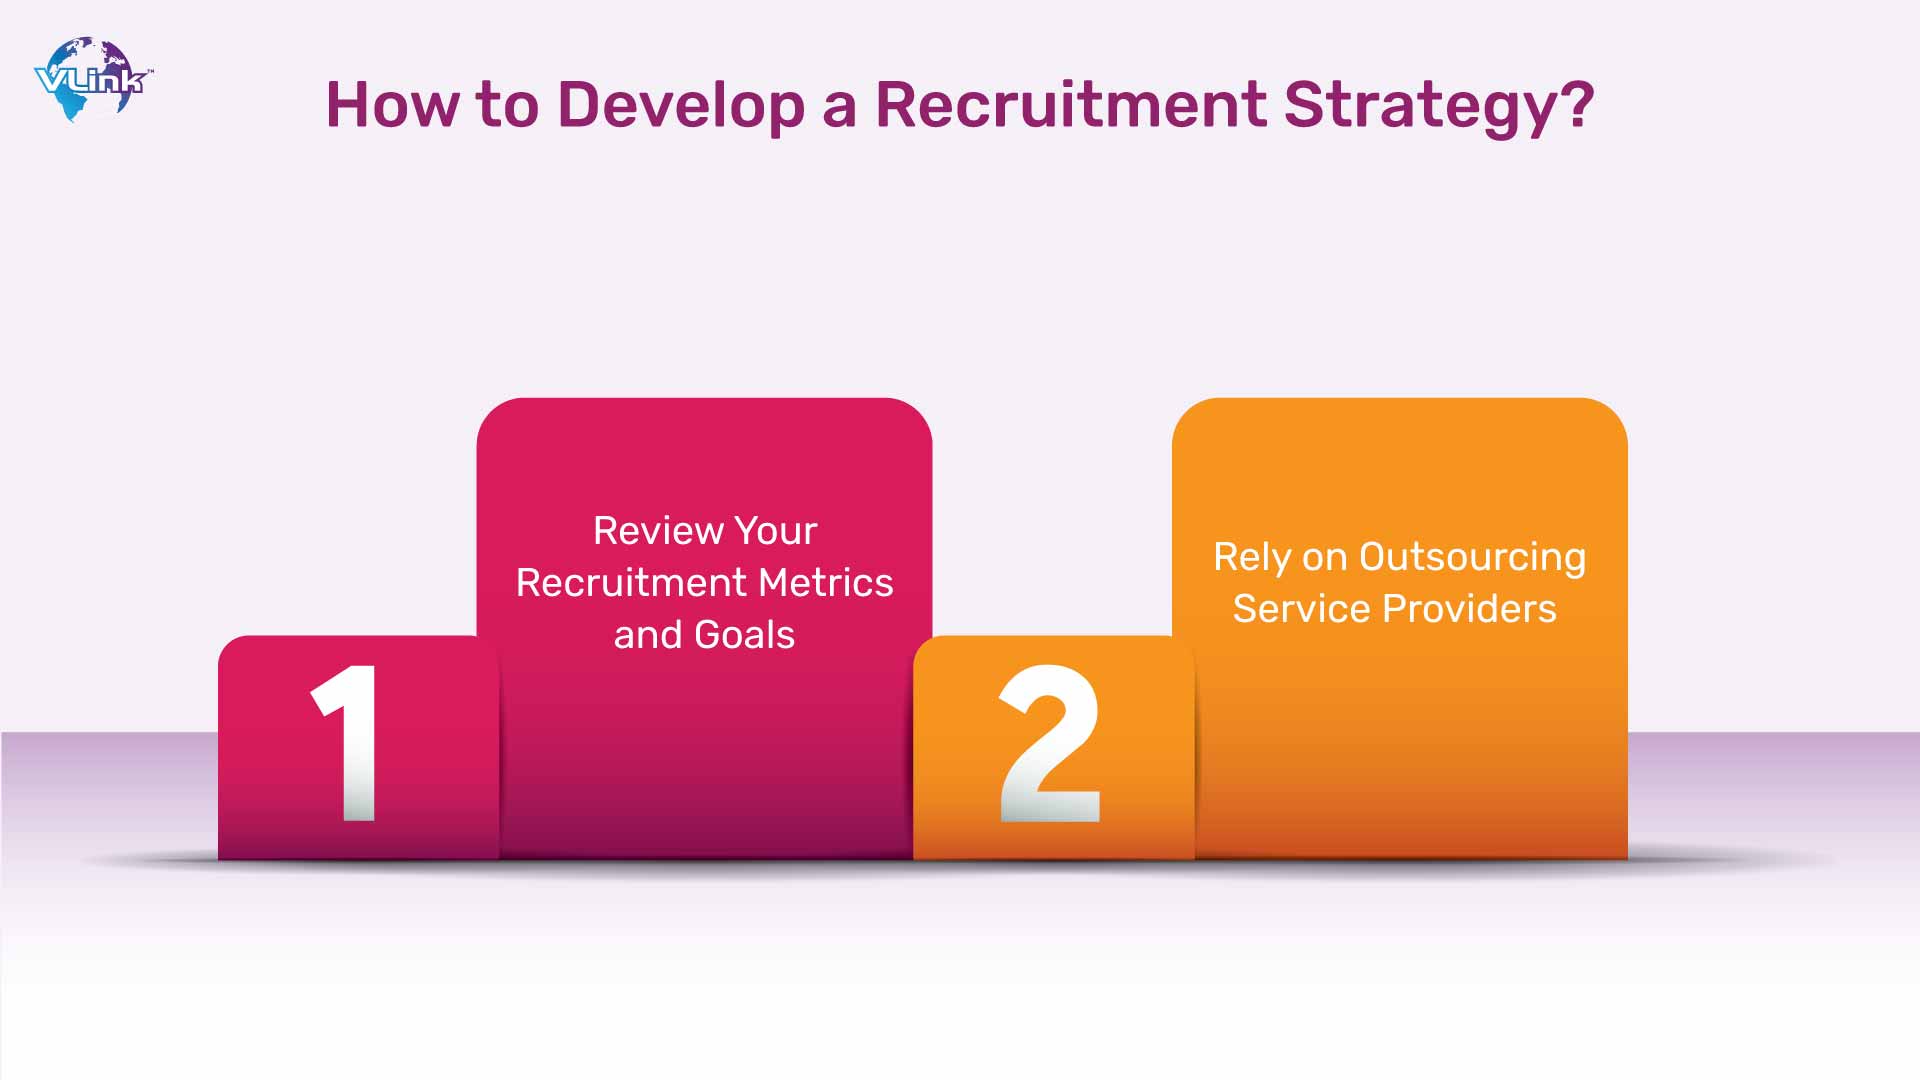 How to Develop a Recruitment Strategy